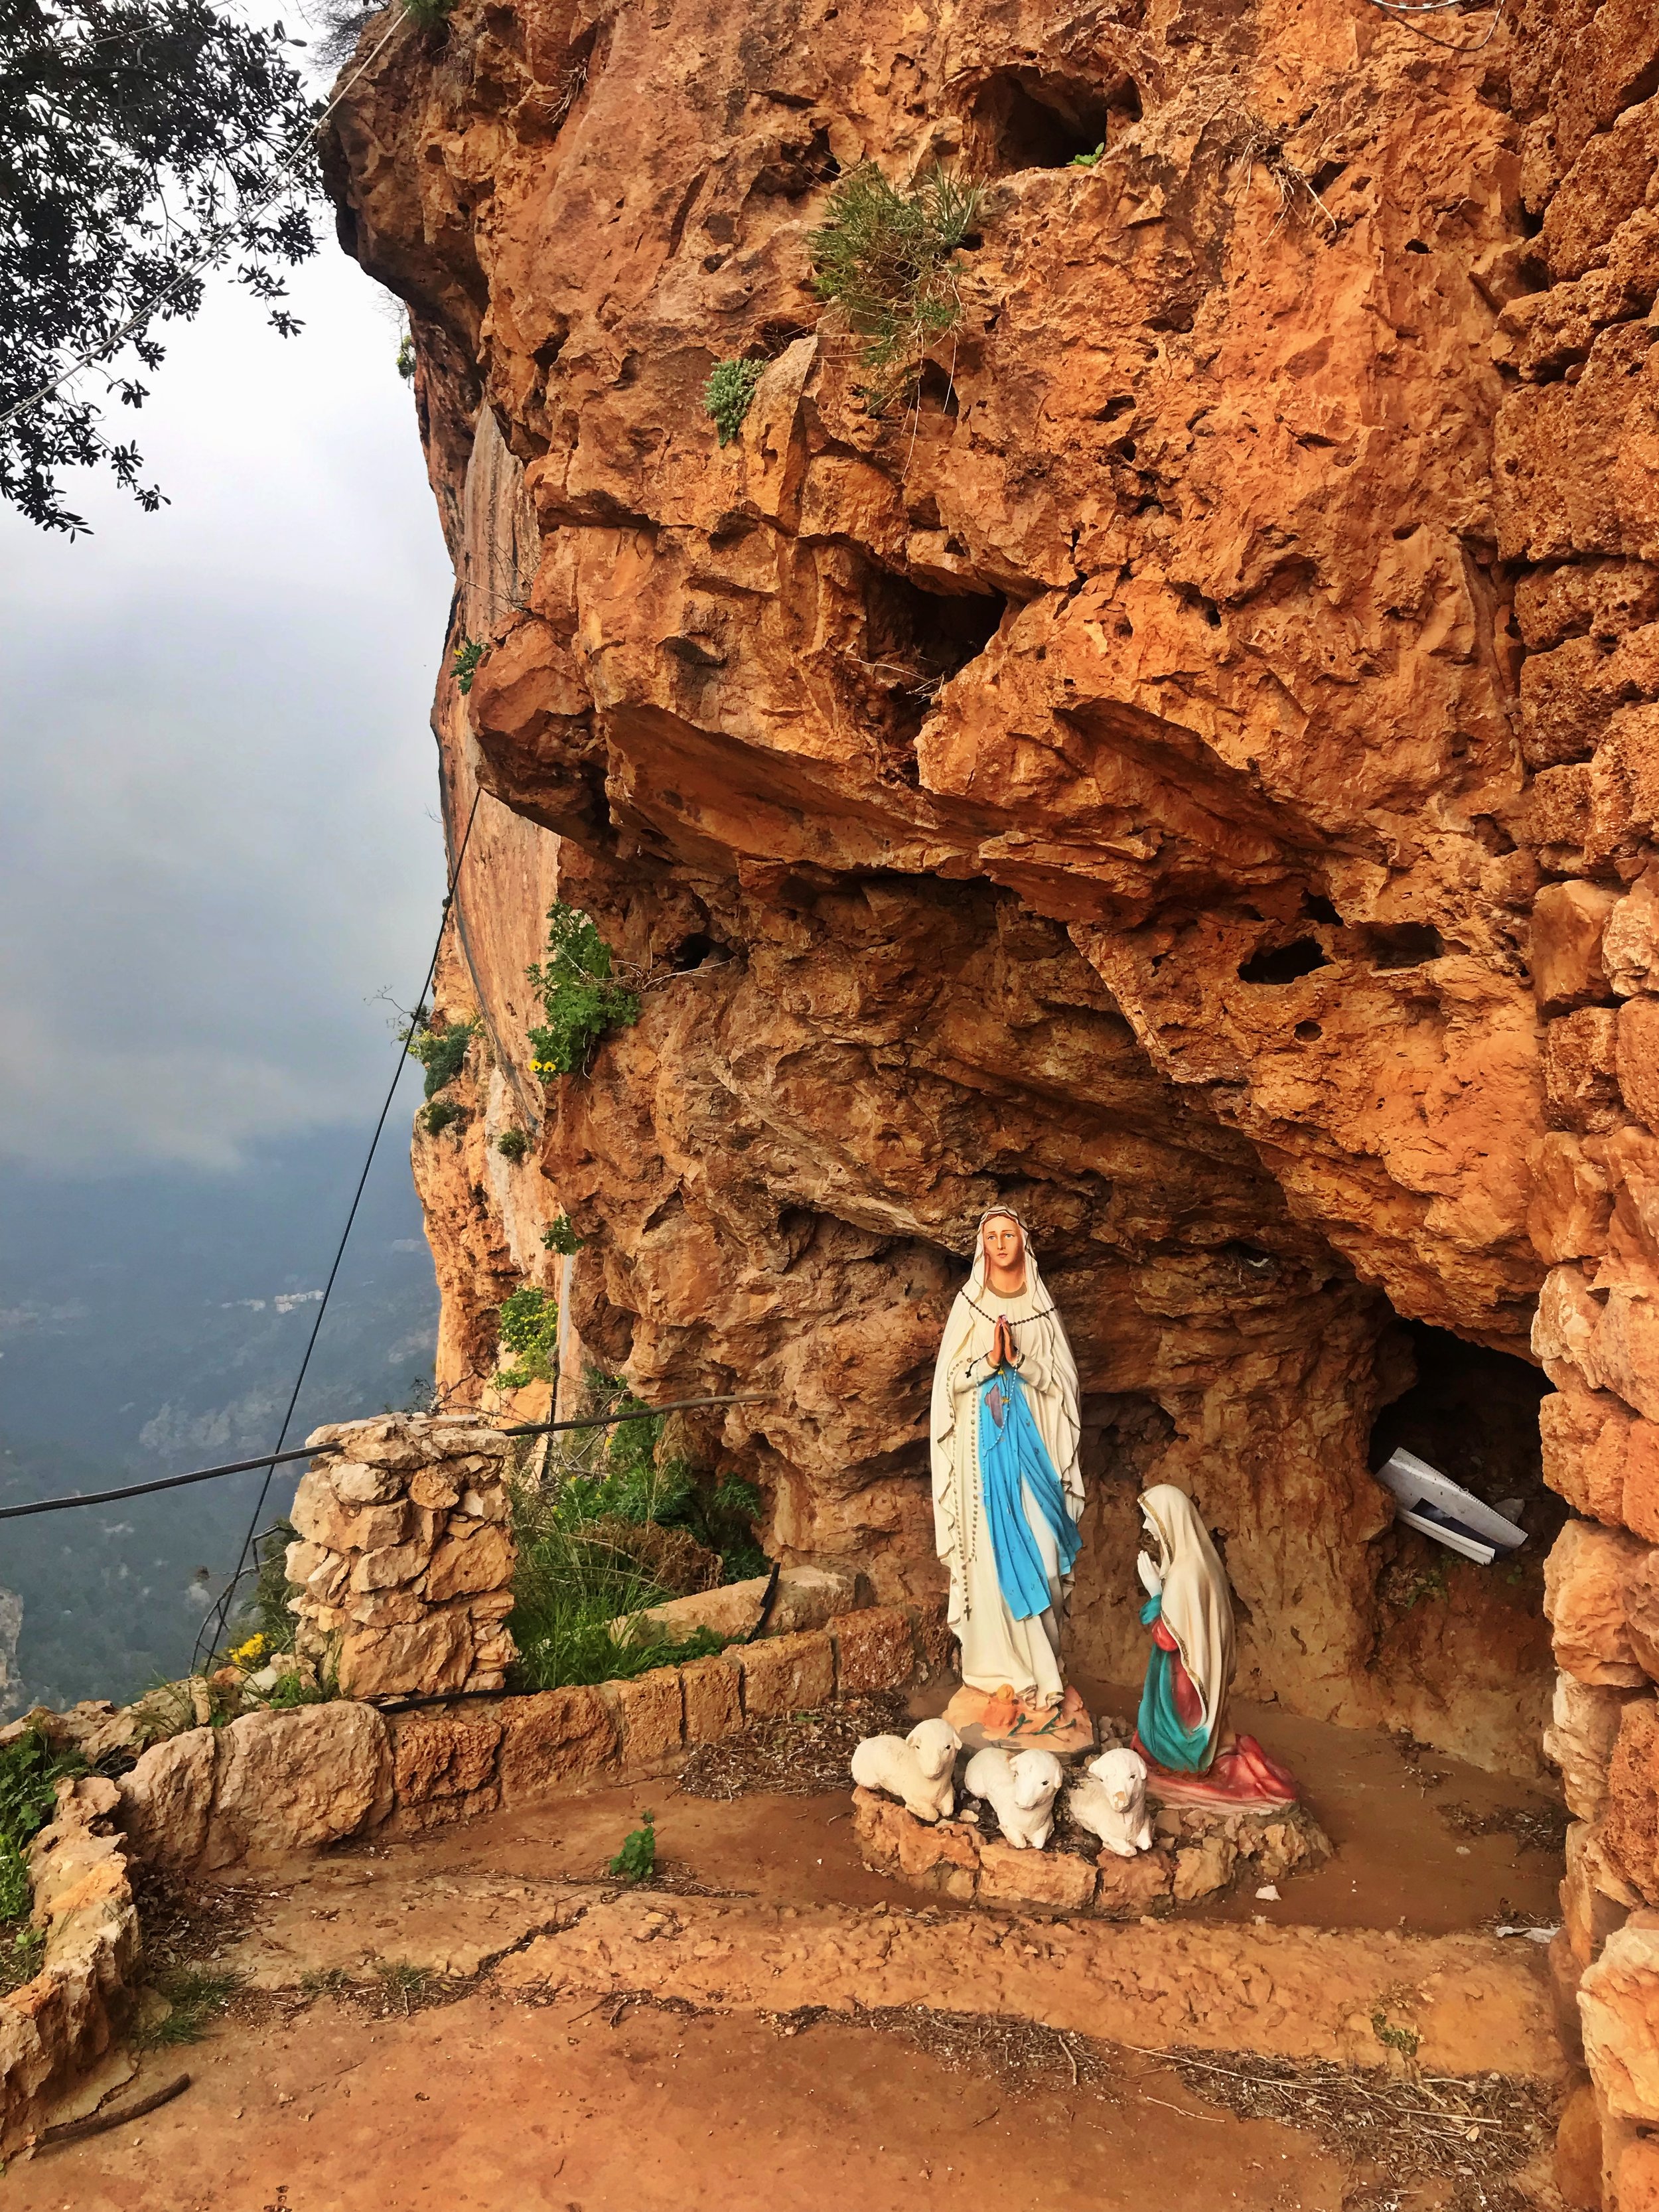 Our Lady of Hawqa Monastery